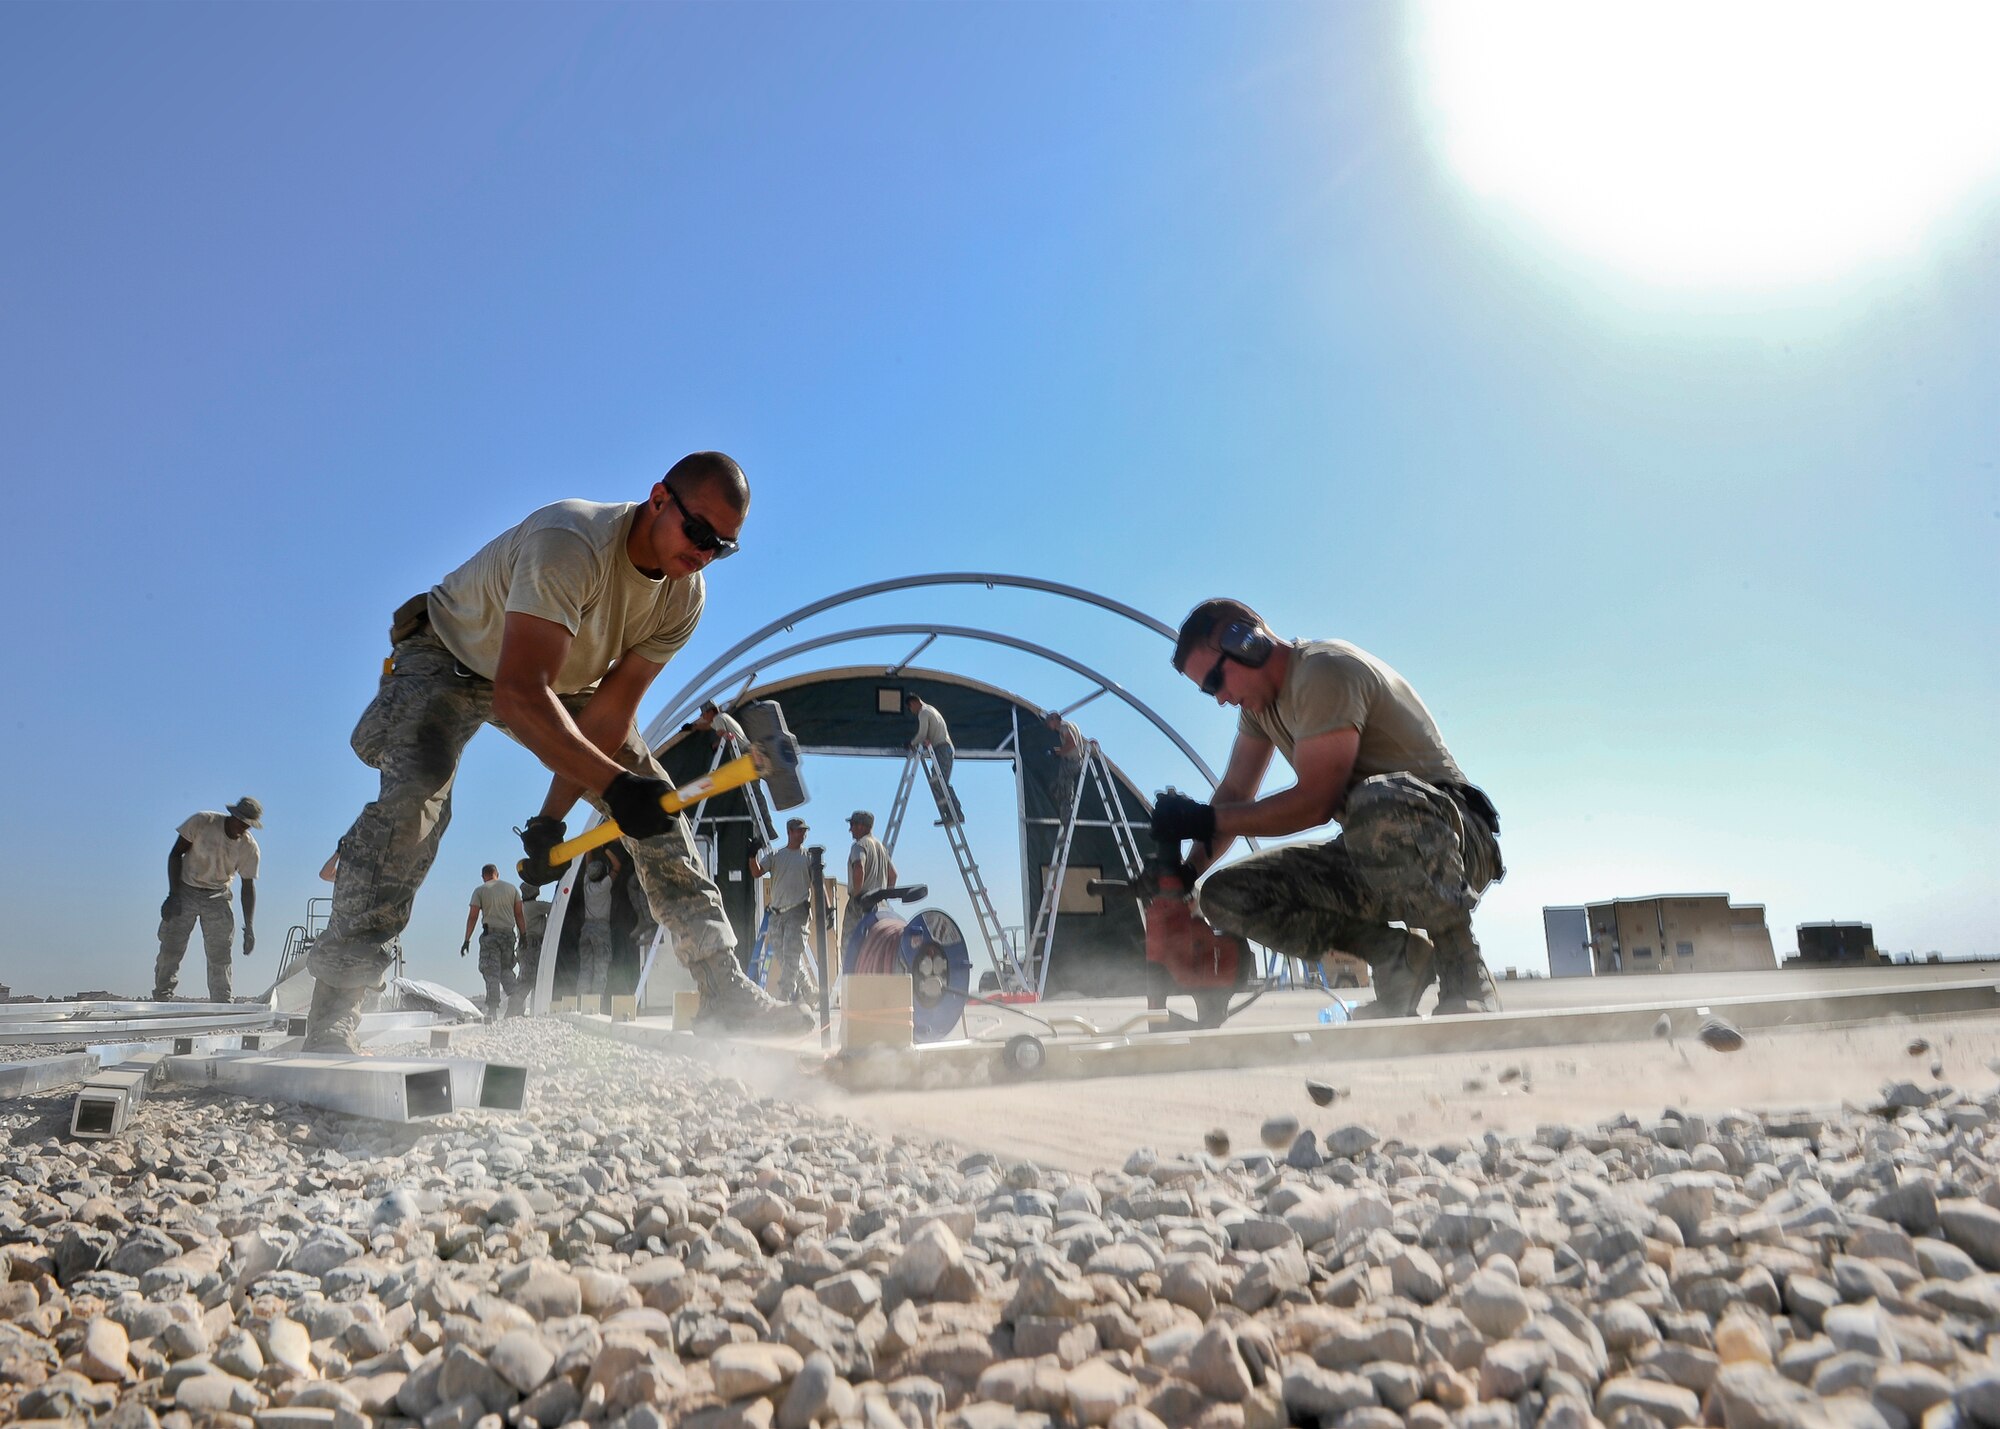 Staff Sgt. Adam Borjon, a 435th Construction Training Squadron engineer system’s operator, and Senior Airman Alen Turner, a 435th CTS pavement and equipment operator, build structures Sept. 23, 2015, in support of personnel recovery operations at Diyarbakir Air Base, Turkey. The 435th Contingency Response Group deployed from Ramstein Air Base, Germany, in support of the U.S. Air Forces Central Command’s staging aircraft and Airmen in southeast Turkey to enhance coalition capabilities to support personnel recovery operations in Syria and Iraq. (U.S. Air Force photo/Airman Cory W. Bush)